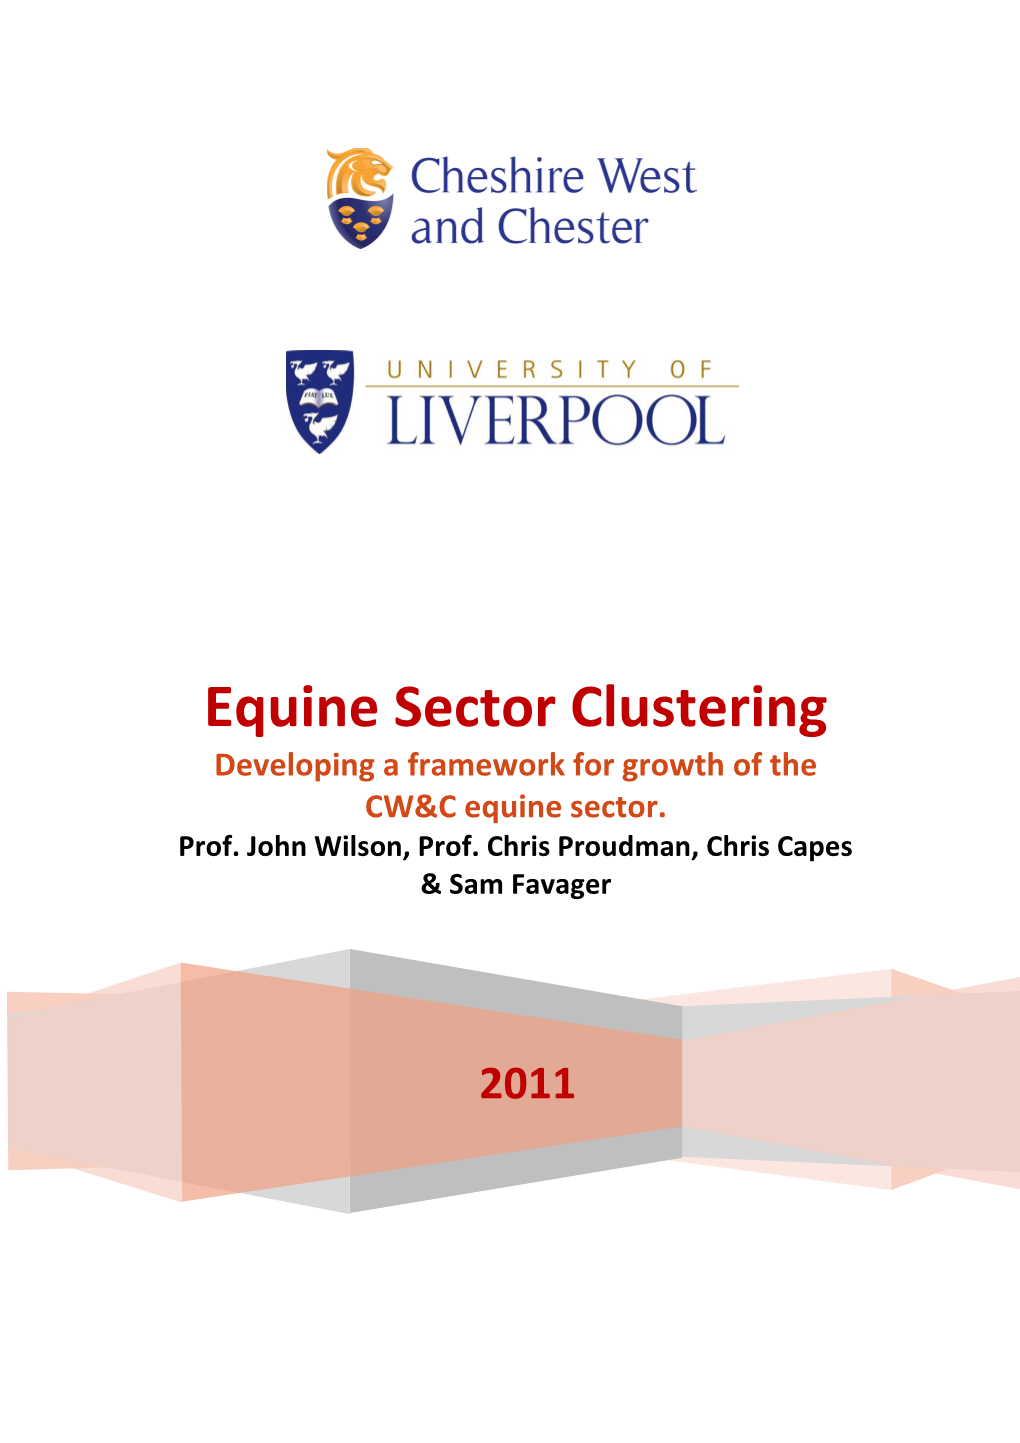 Equine Sector Clustering Developing a Framework for Growth of the CW&C Equine Sector